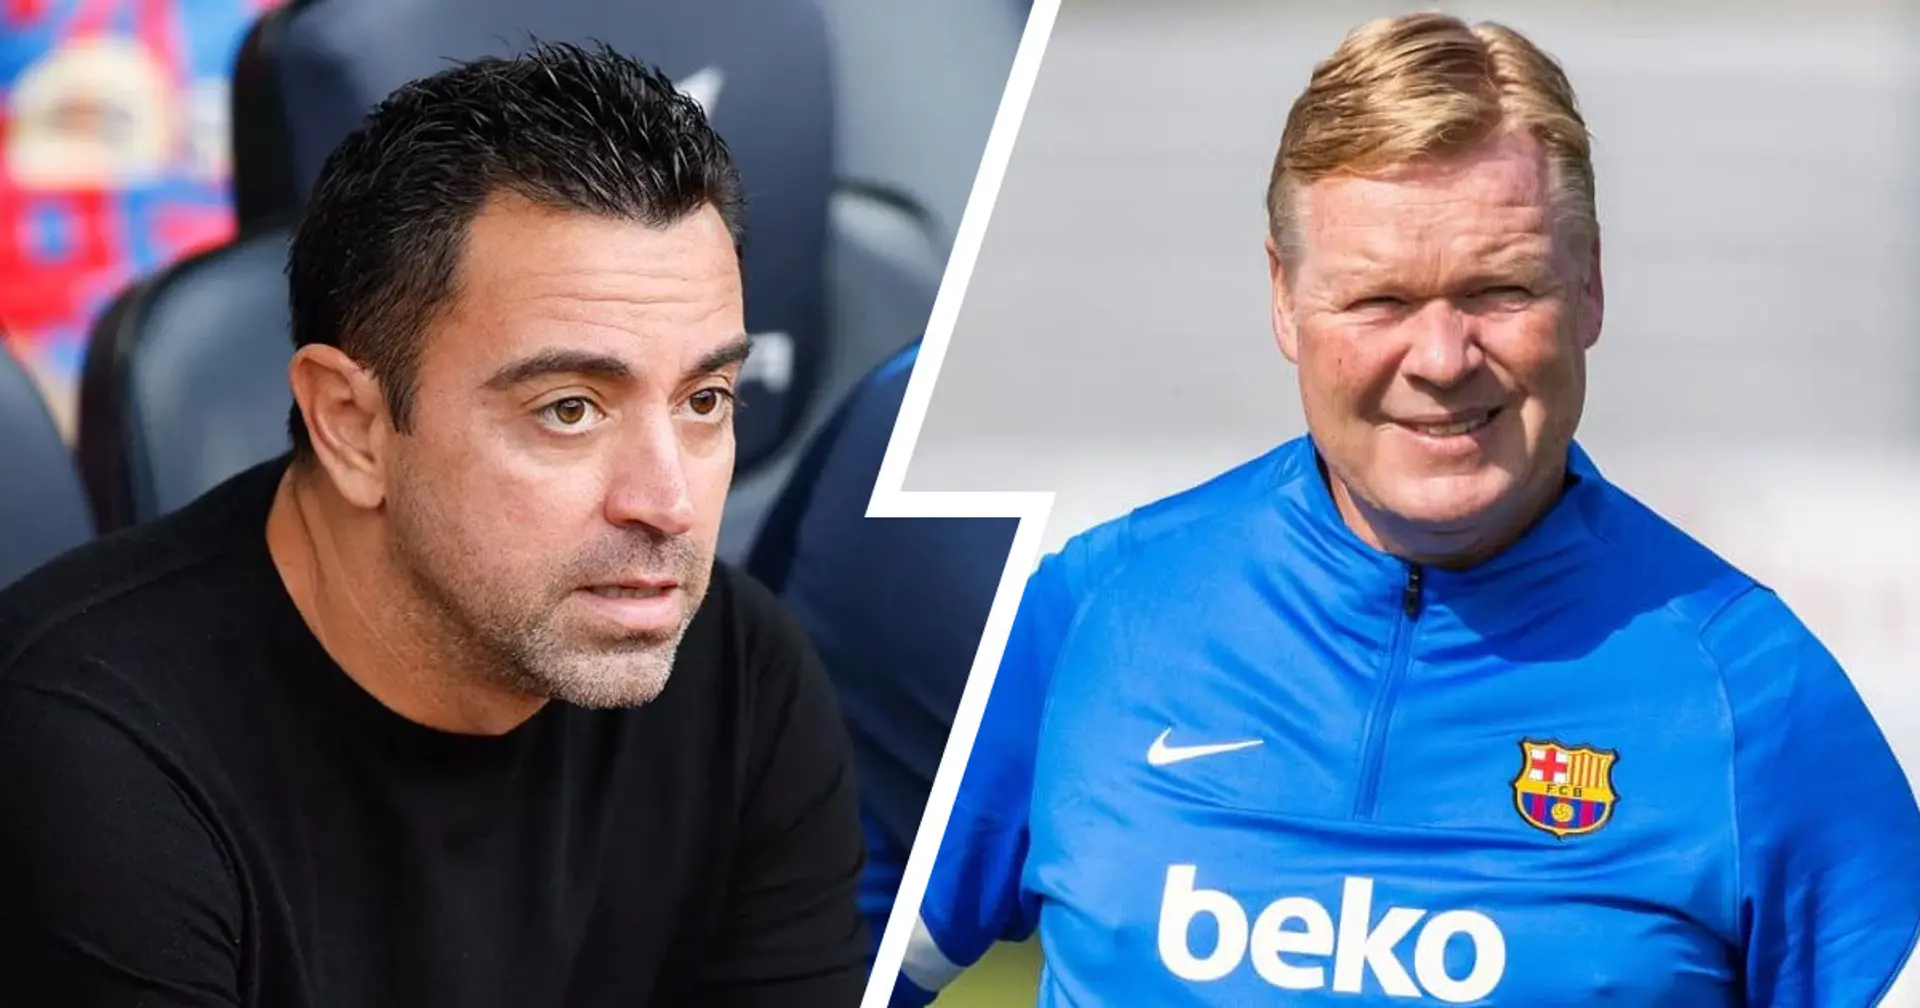 7 points more: current start of La Liga compared to last year under Koeman 